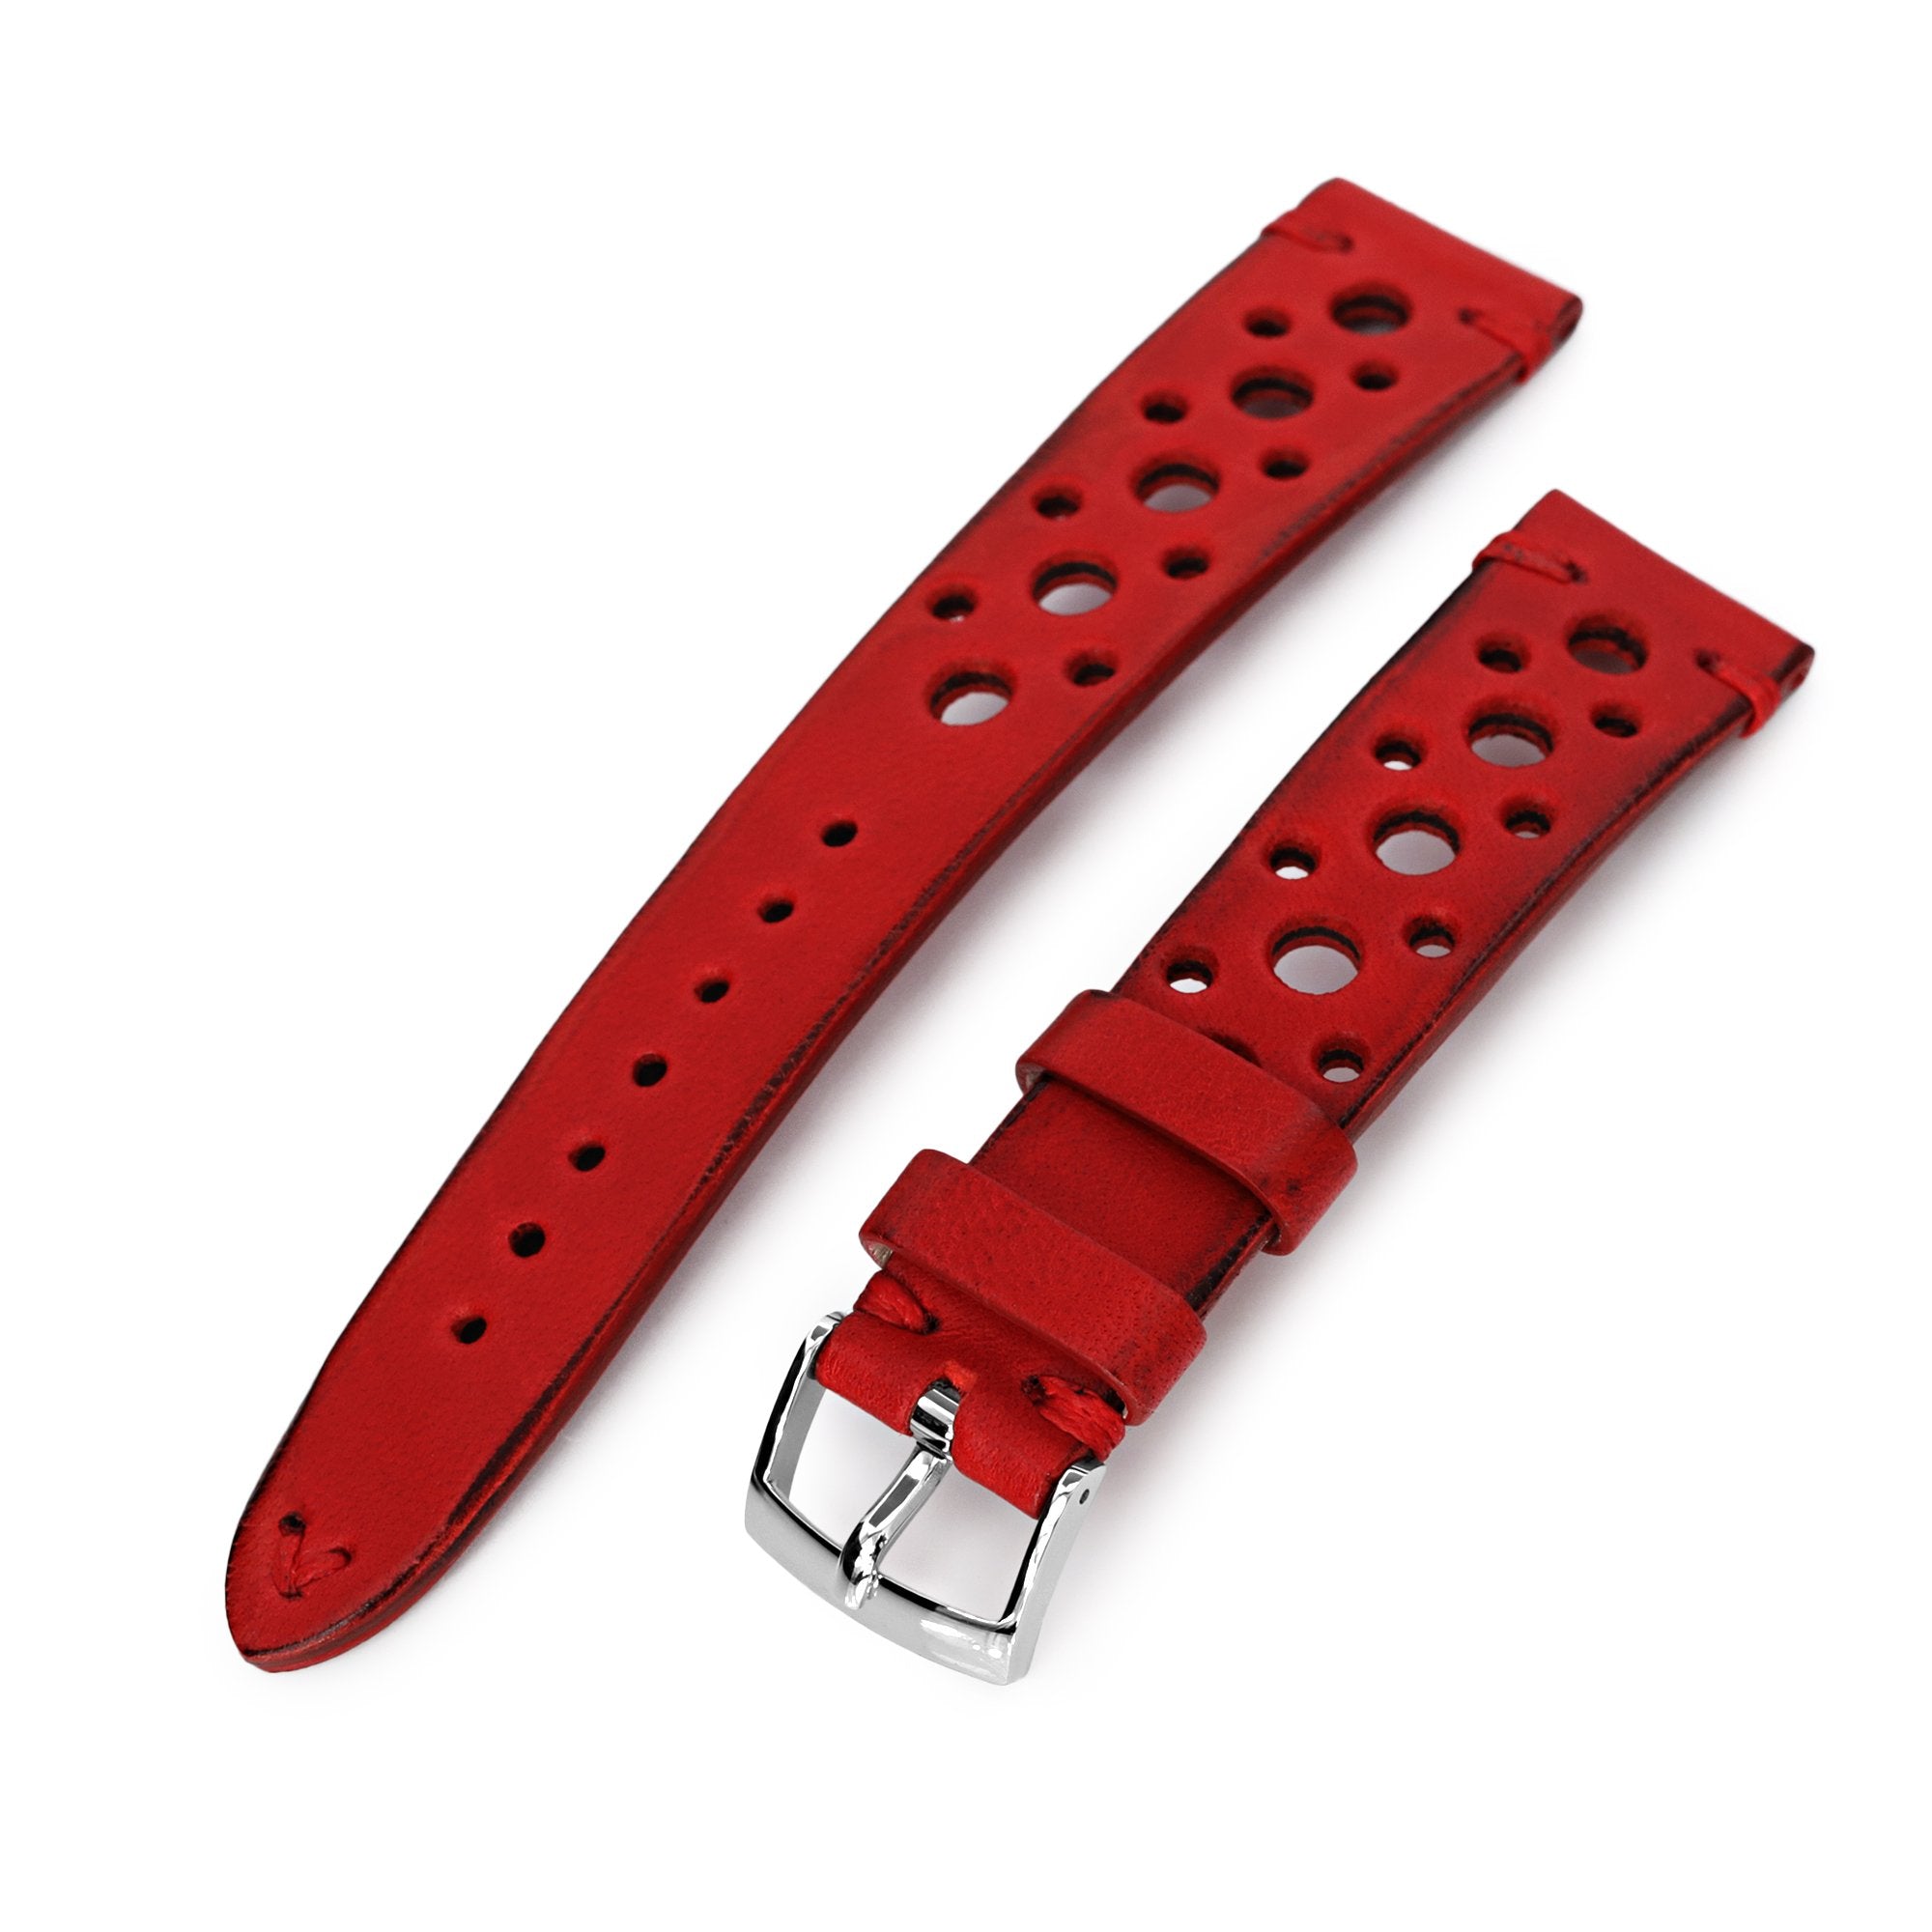 20mm Red Italian Handmade Racer Watch Band, P Buckle Strapcode Watch Bands